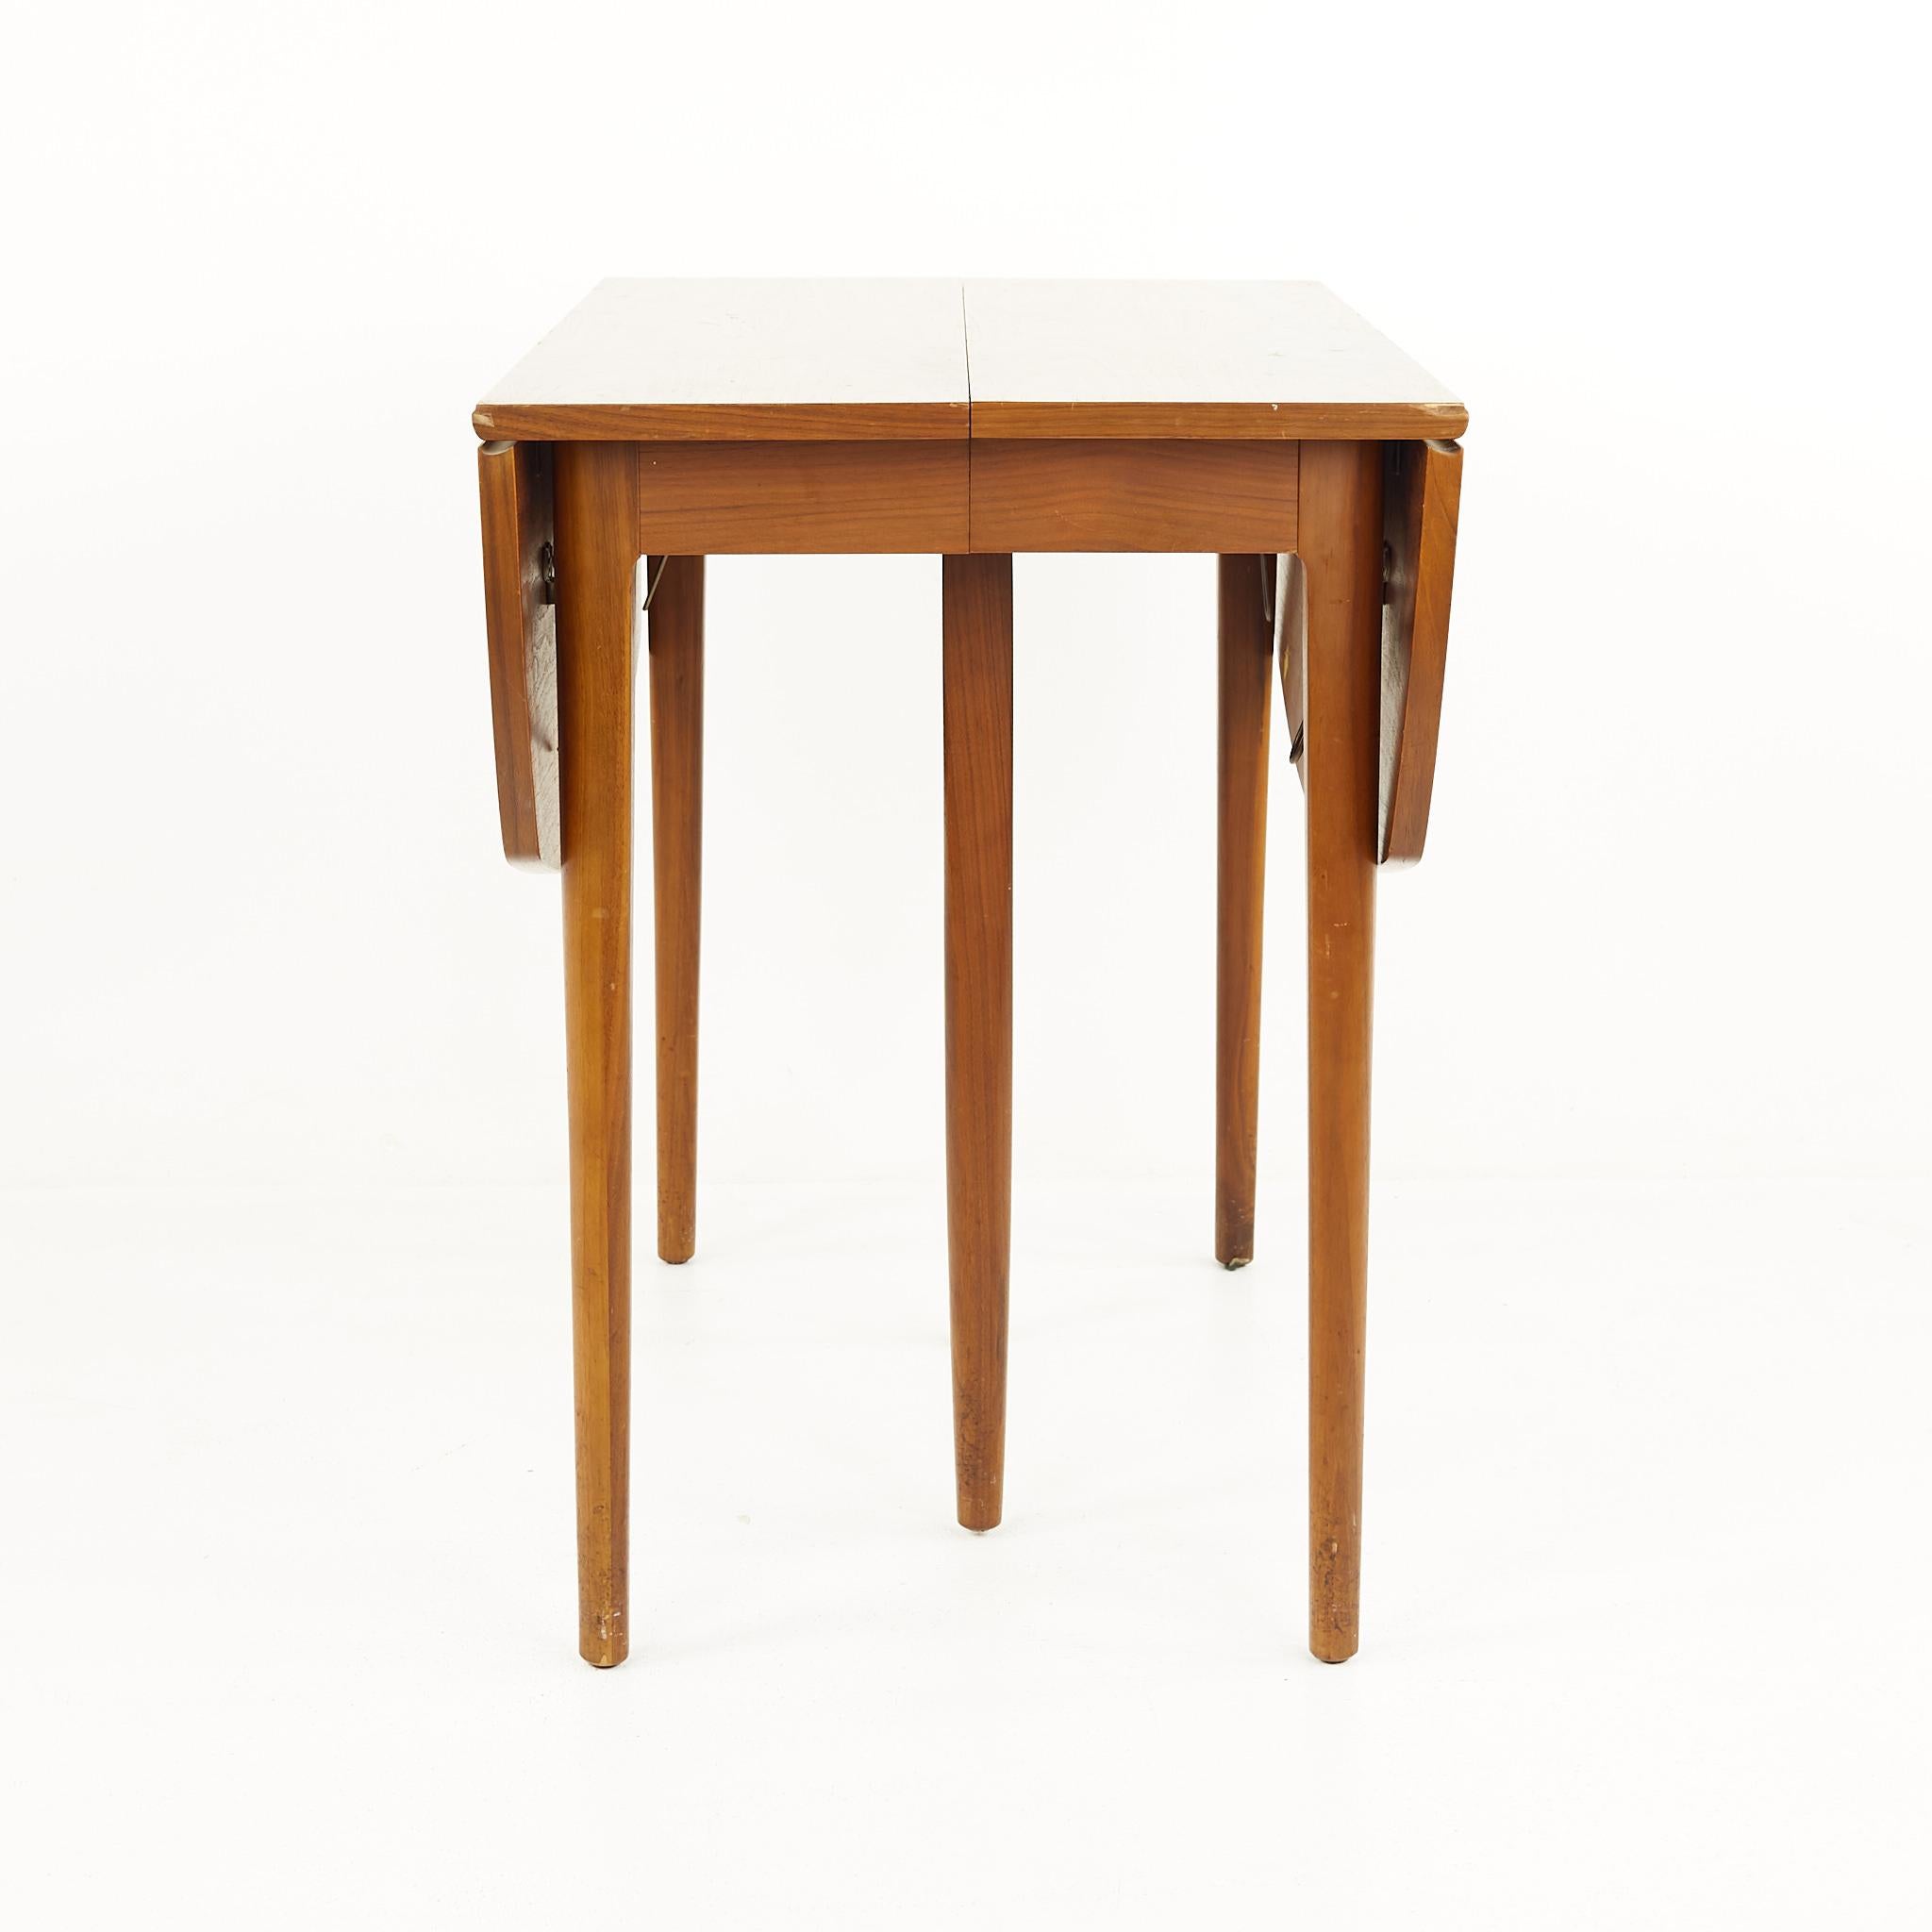 Kipp Stewart for Drexel mid century walnut drop leaf dining table

The closed table measures: 21.5 wide x 38 deep x 29.75 high, with a chair clearance of 28.75 inches

The open table measures: 45.5 wide; each leaf is 13 inches wide, making a